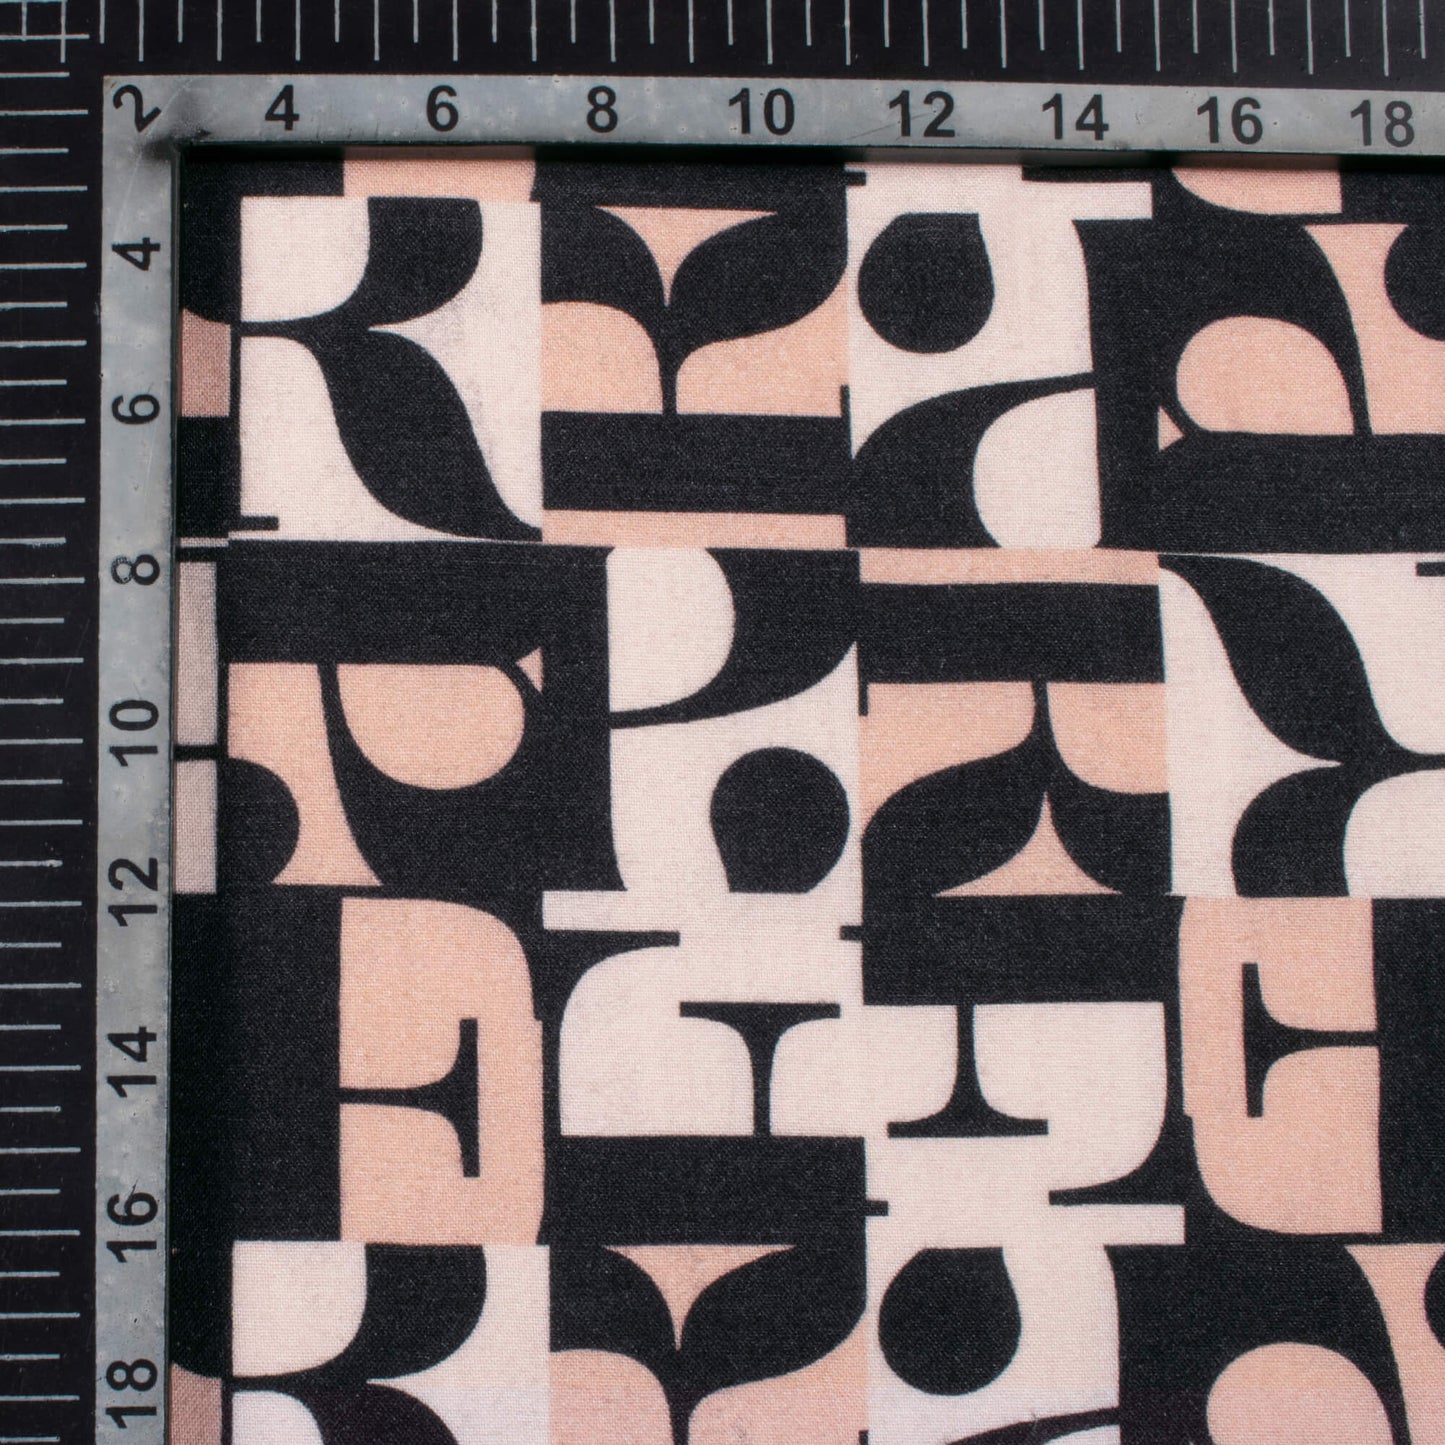 Black And Peach Quirky Pattern Digital Print Viscose Rayon Fabric (Width 58 Inches)